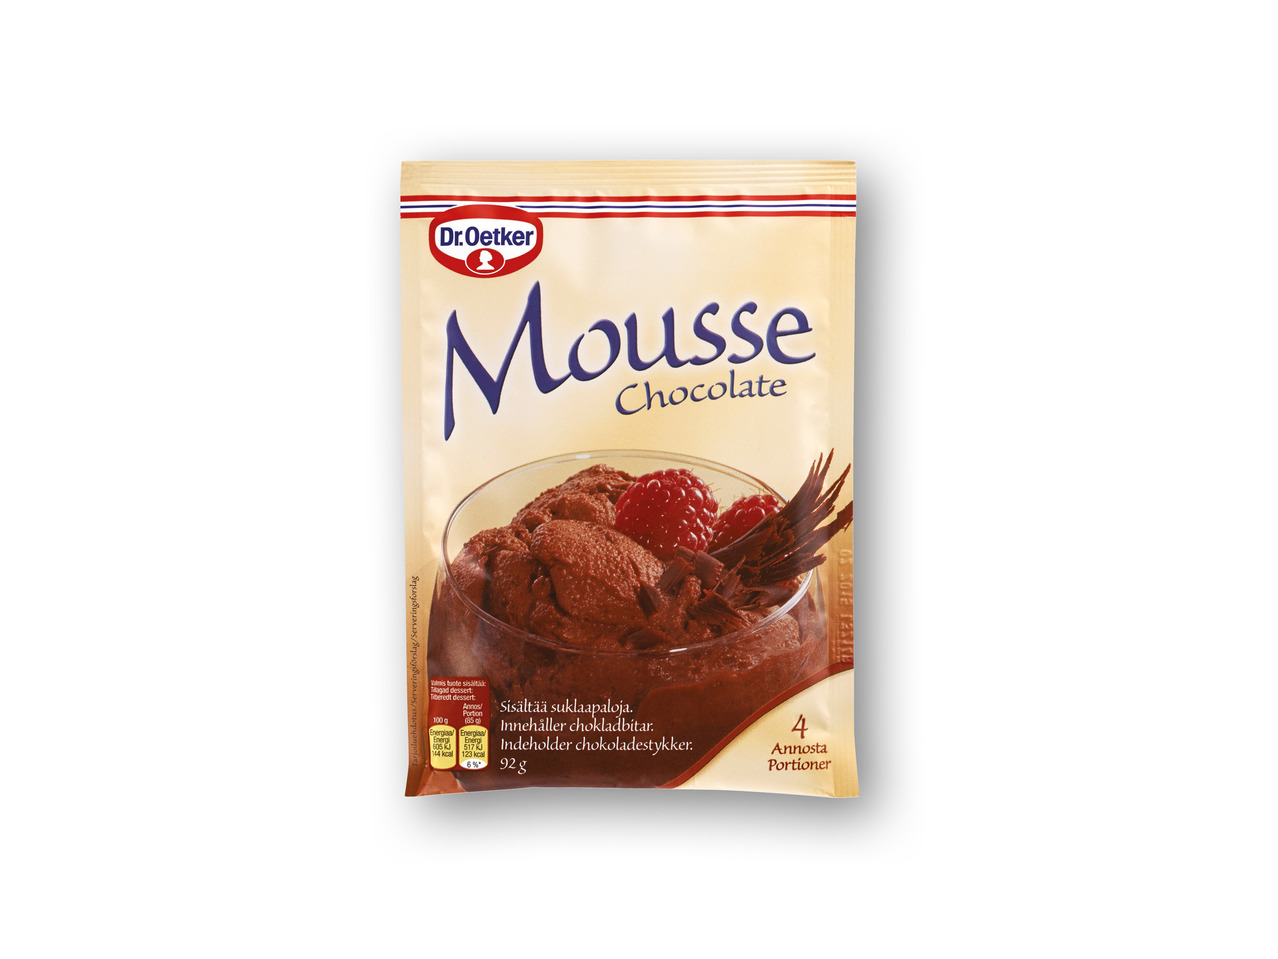 DR. OETKER Mousse Chocolate